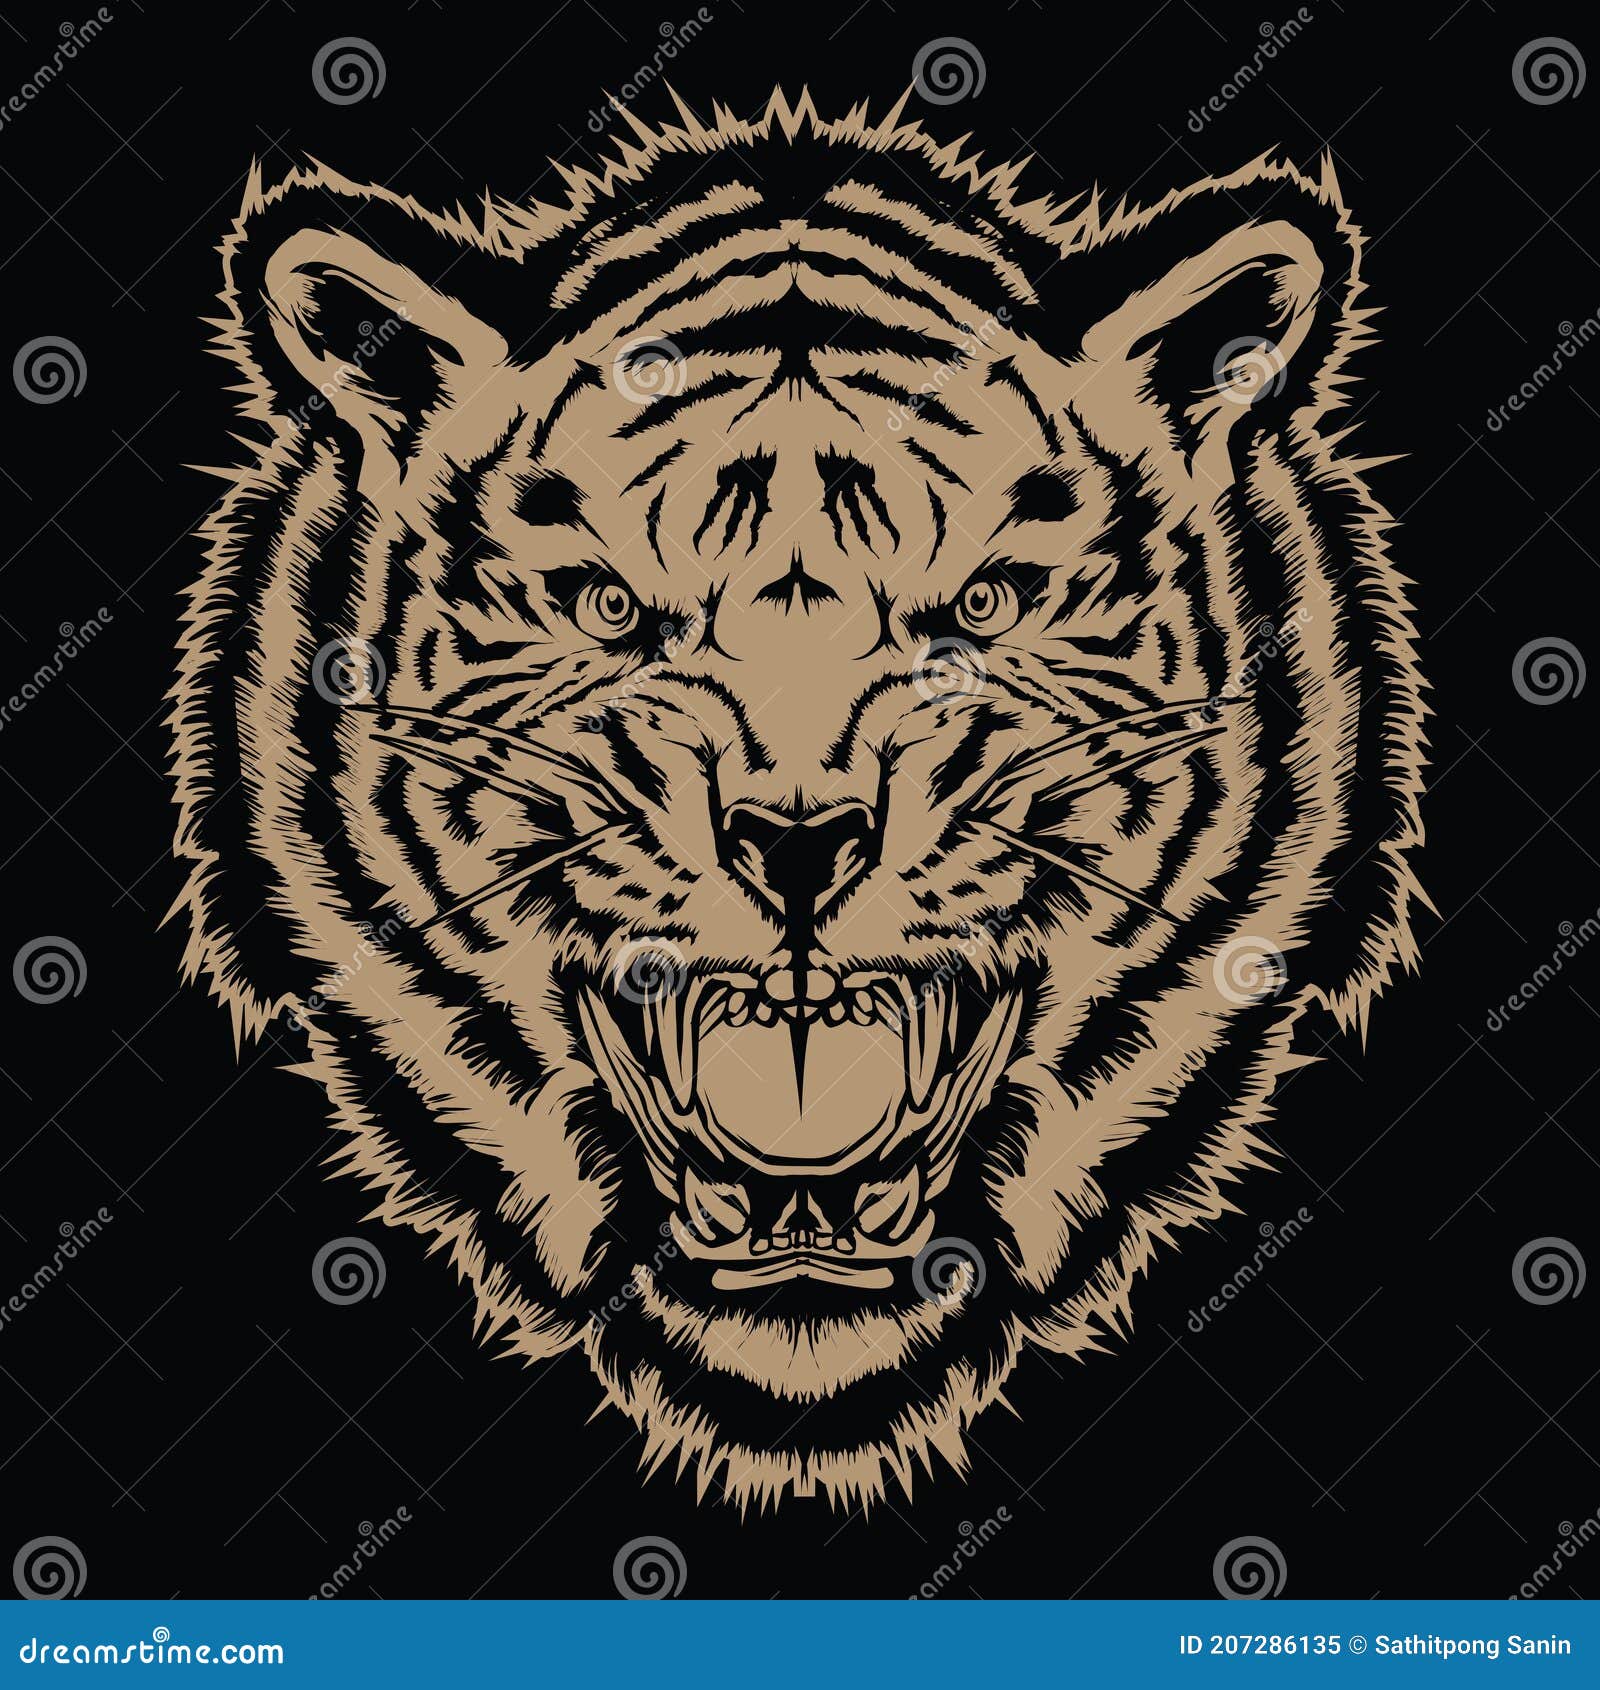 4 Angry Tiger Head Tattoos